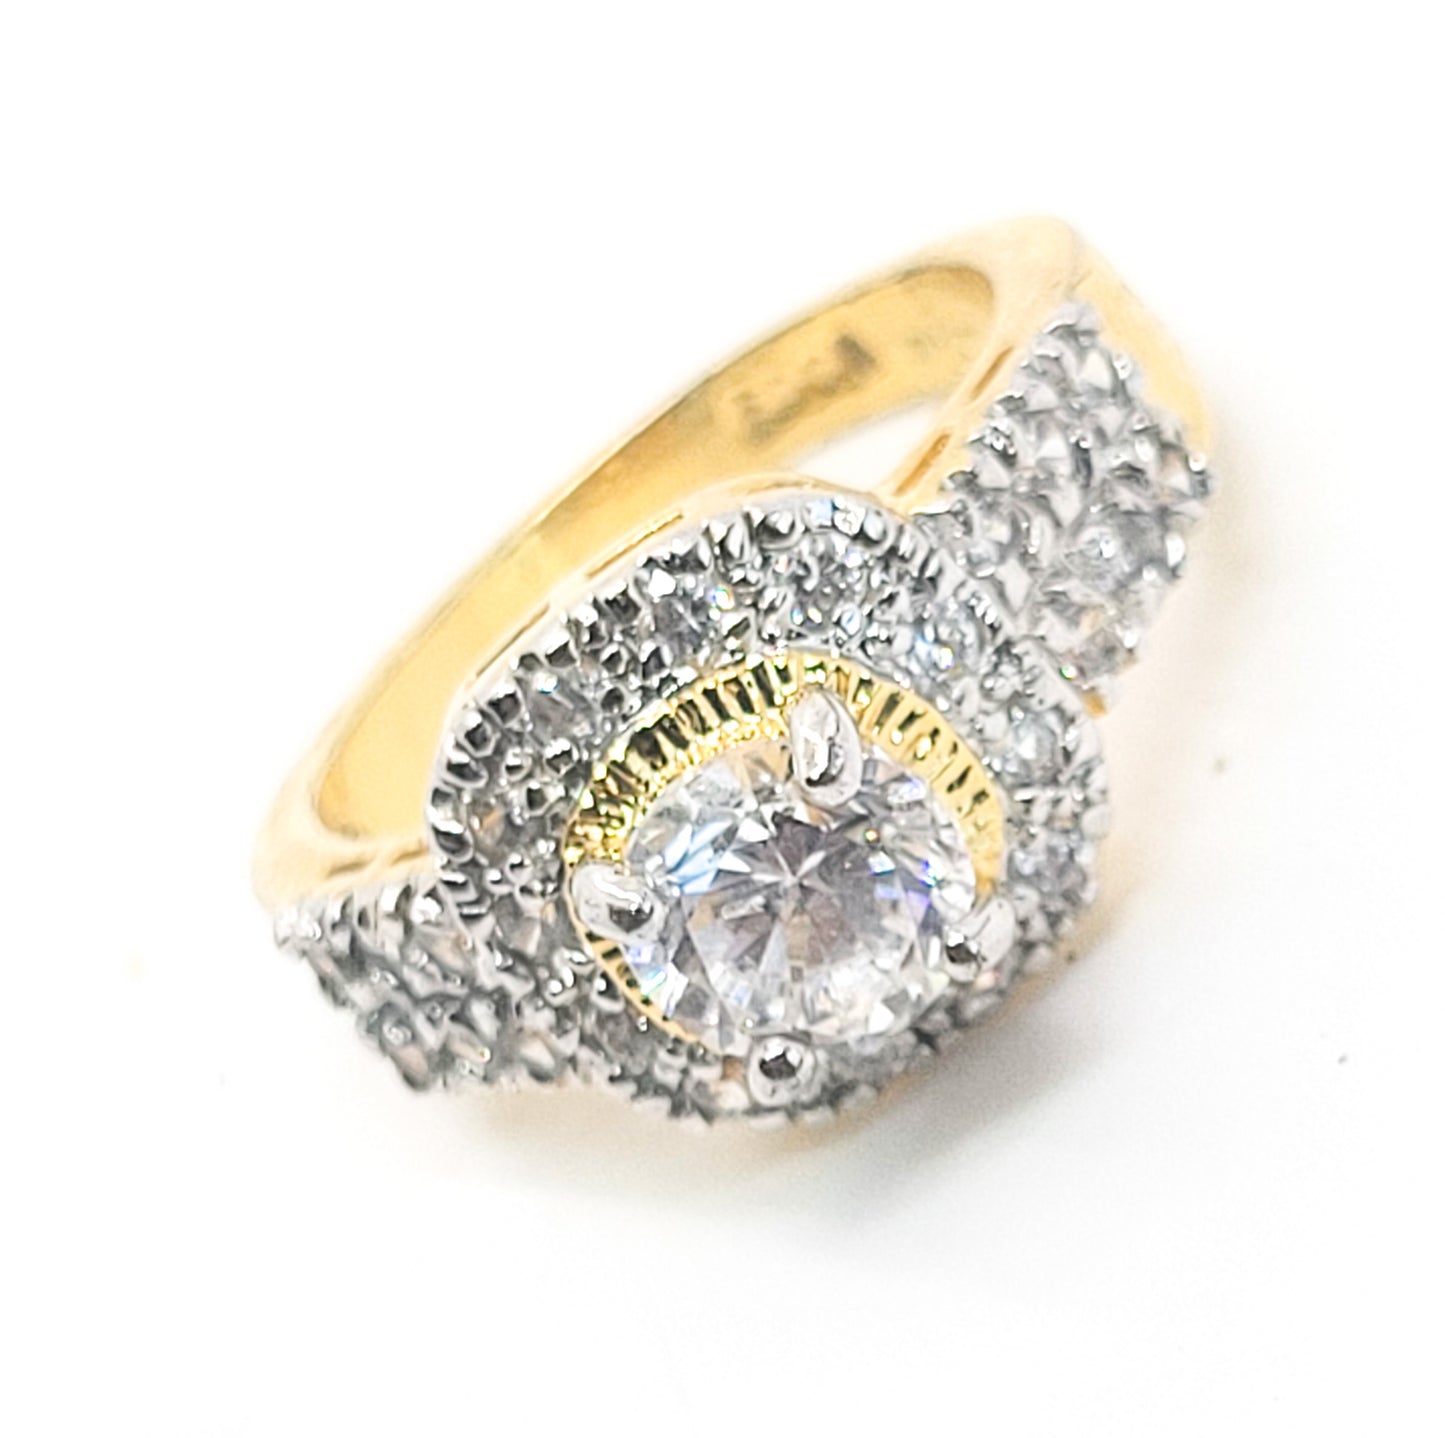 EDCO yellow gold plated Halo CZ cubic Zirconia large cocktail ring size 8.5